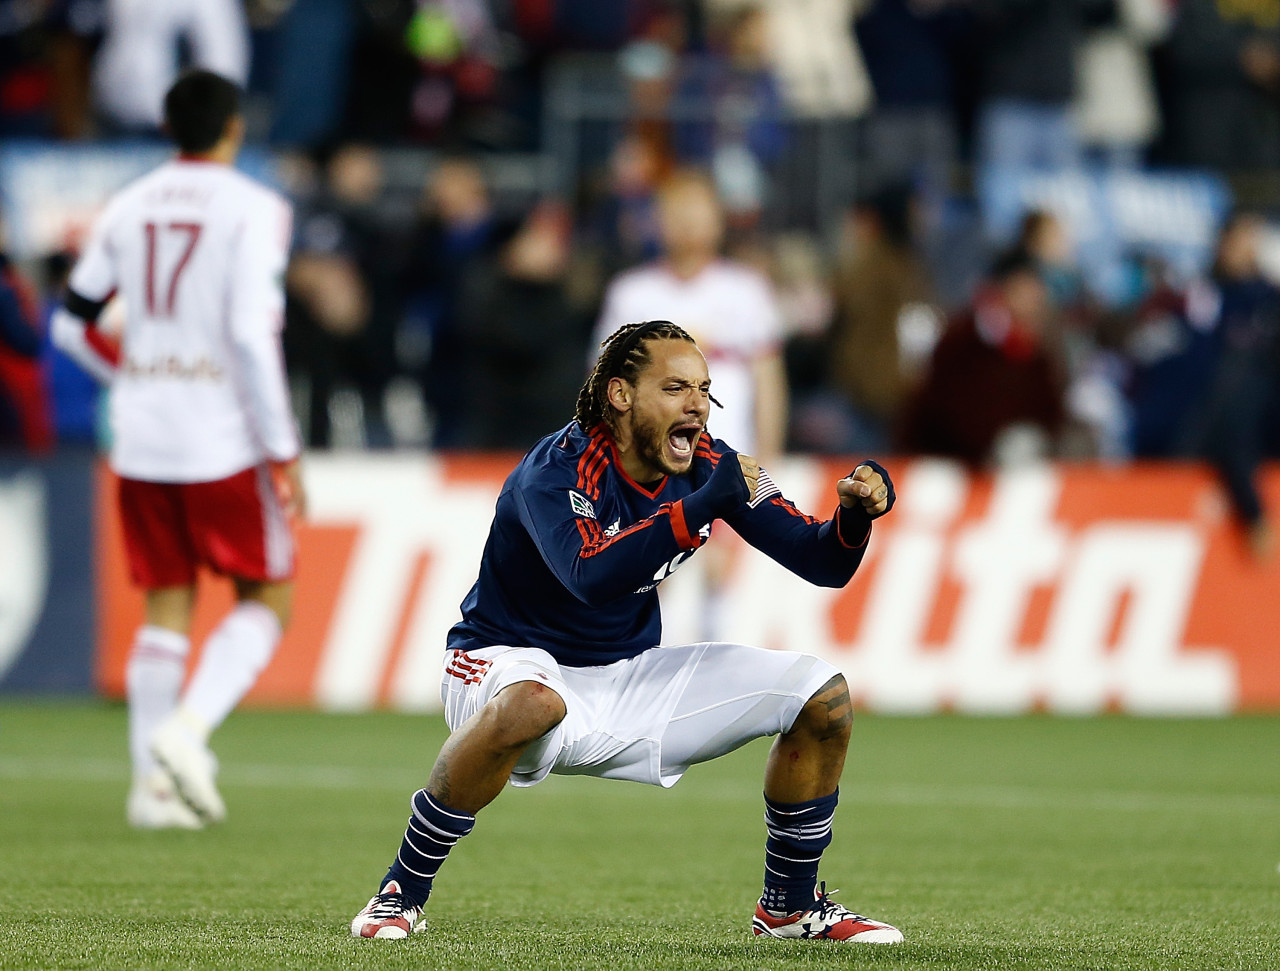 The mid-season acquisition of Jermaine Jones, who played with the U,S. Men's National Team at the 2014 World Cup, has helped propel to the Revolution to the MLS Cup. (Jim Rogash/Getty Images)